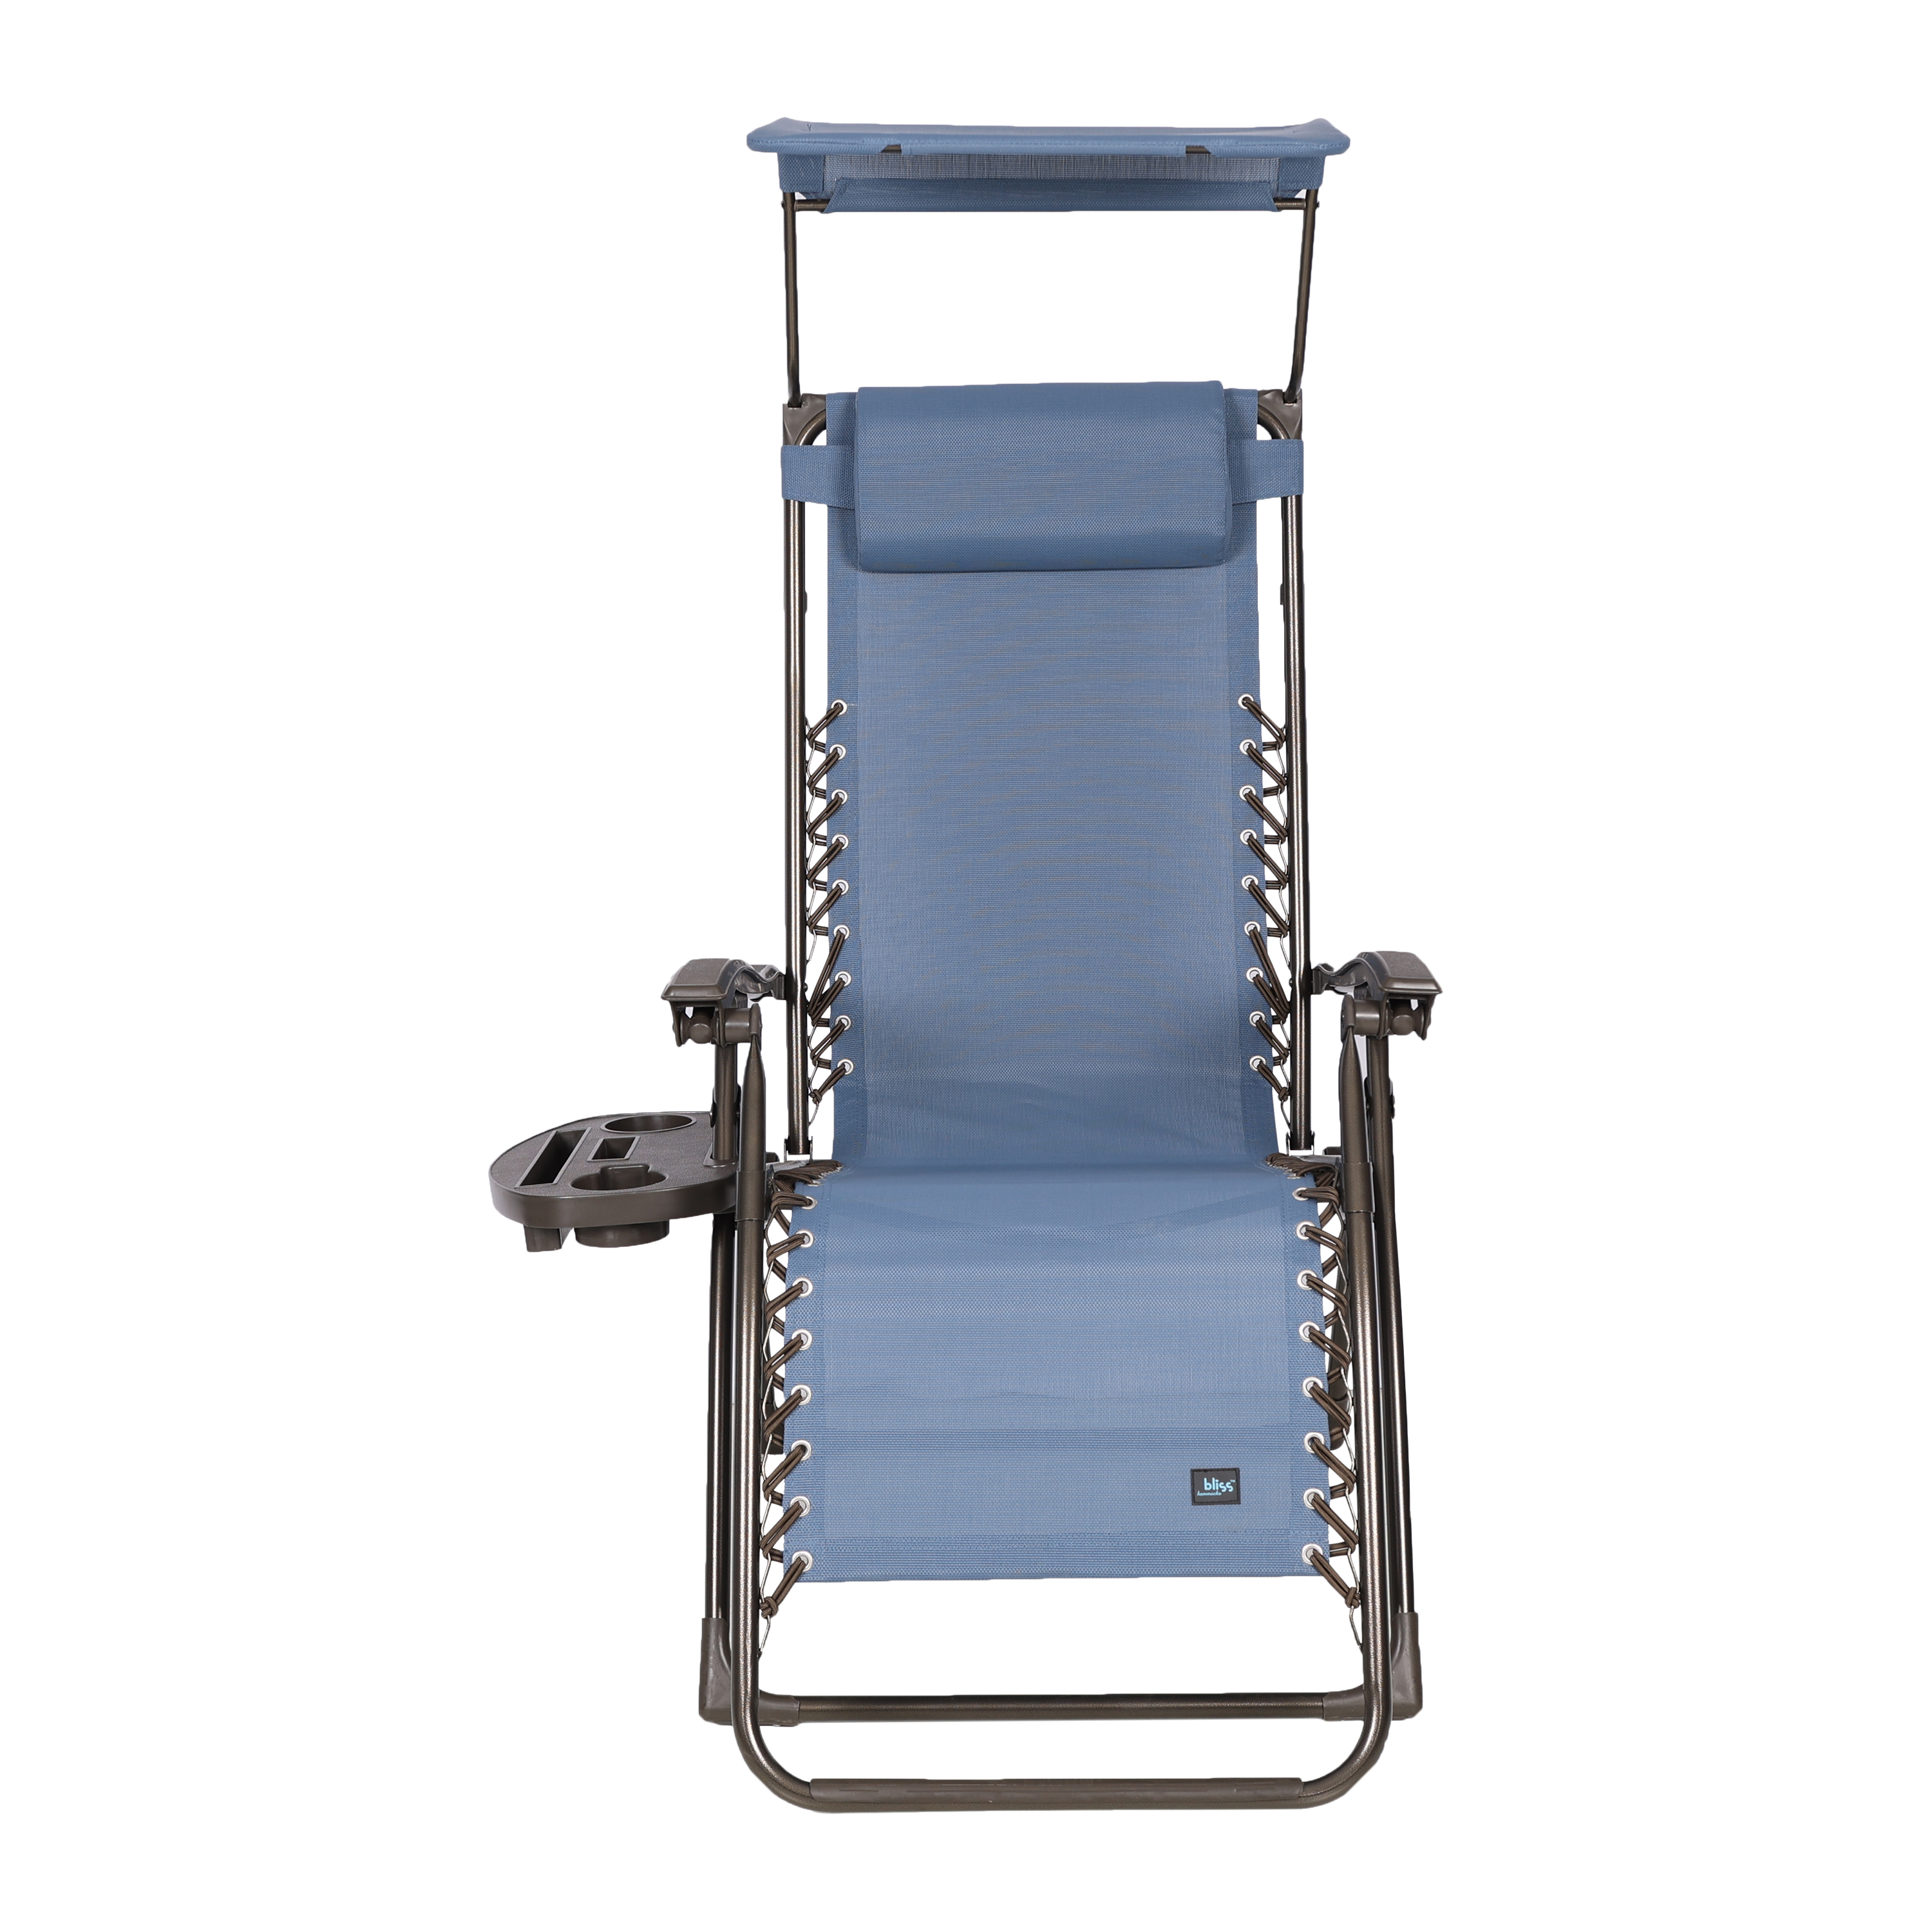 Bliss Hammocks 26" Wide Base Model Zero Gravity Chair w/ Canopy, Pillow, & Drink Tray Folding Outdoor Lawn, Deck, Patio Adjustable Lounge Chair, 300lbs. Weather and Rust Resistant, Denim Blue - image 2 of 4